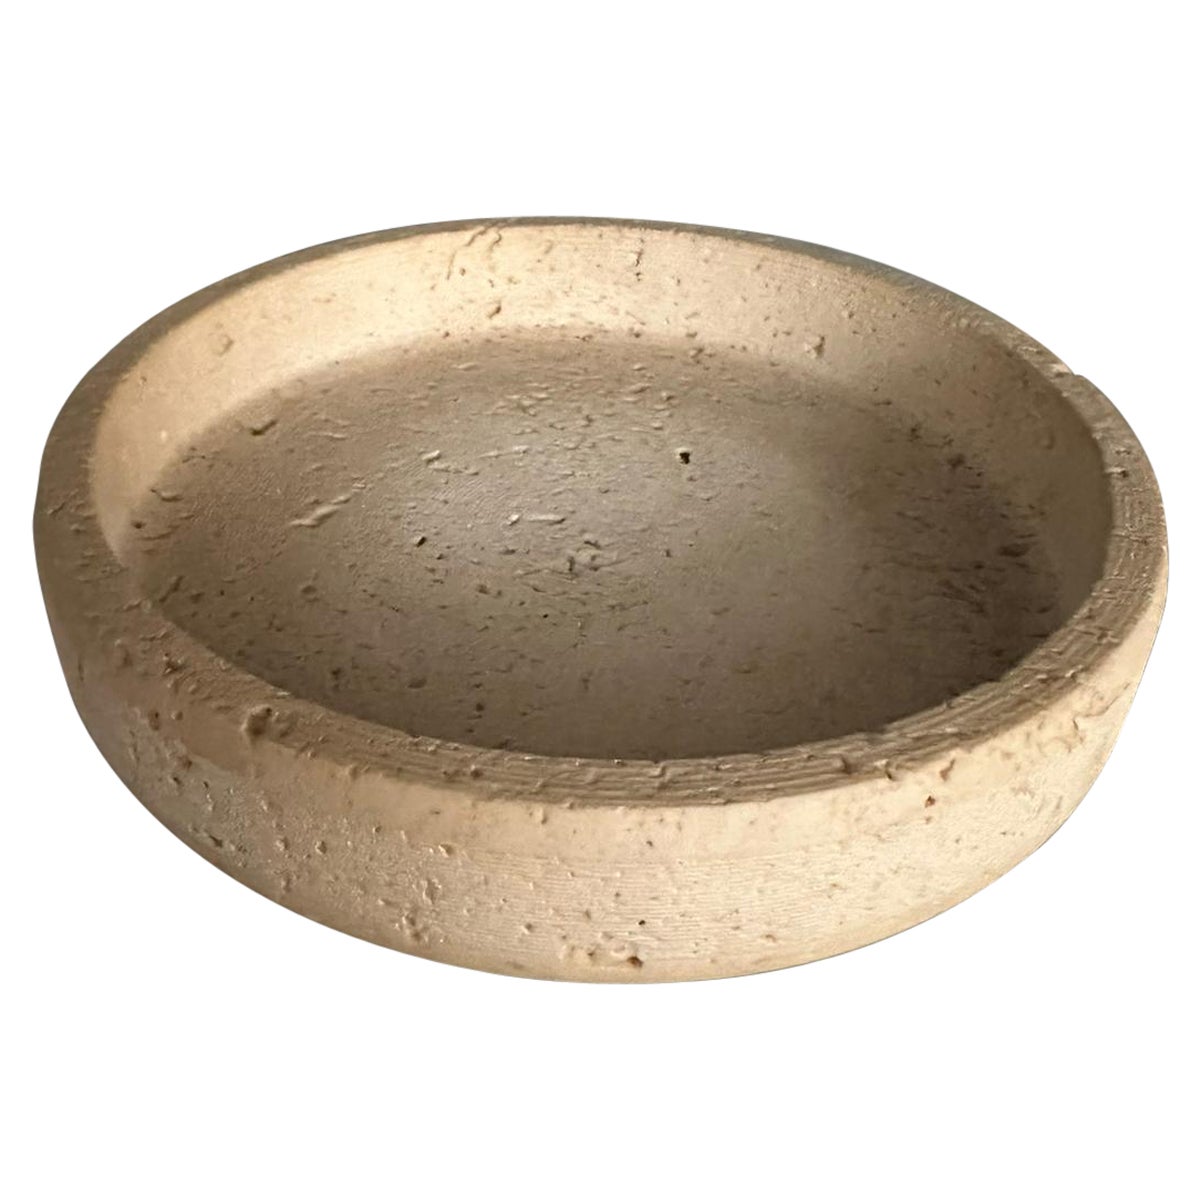 Bowl Centerpiece by Up&Up by E.Di Rosa P.A Giusti, Travertine Marble, 1970 For Sale